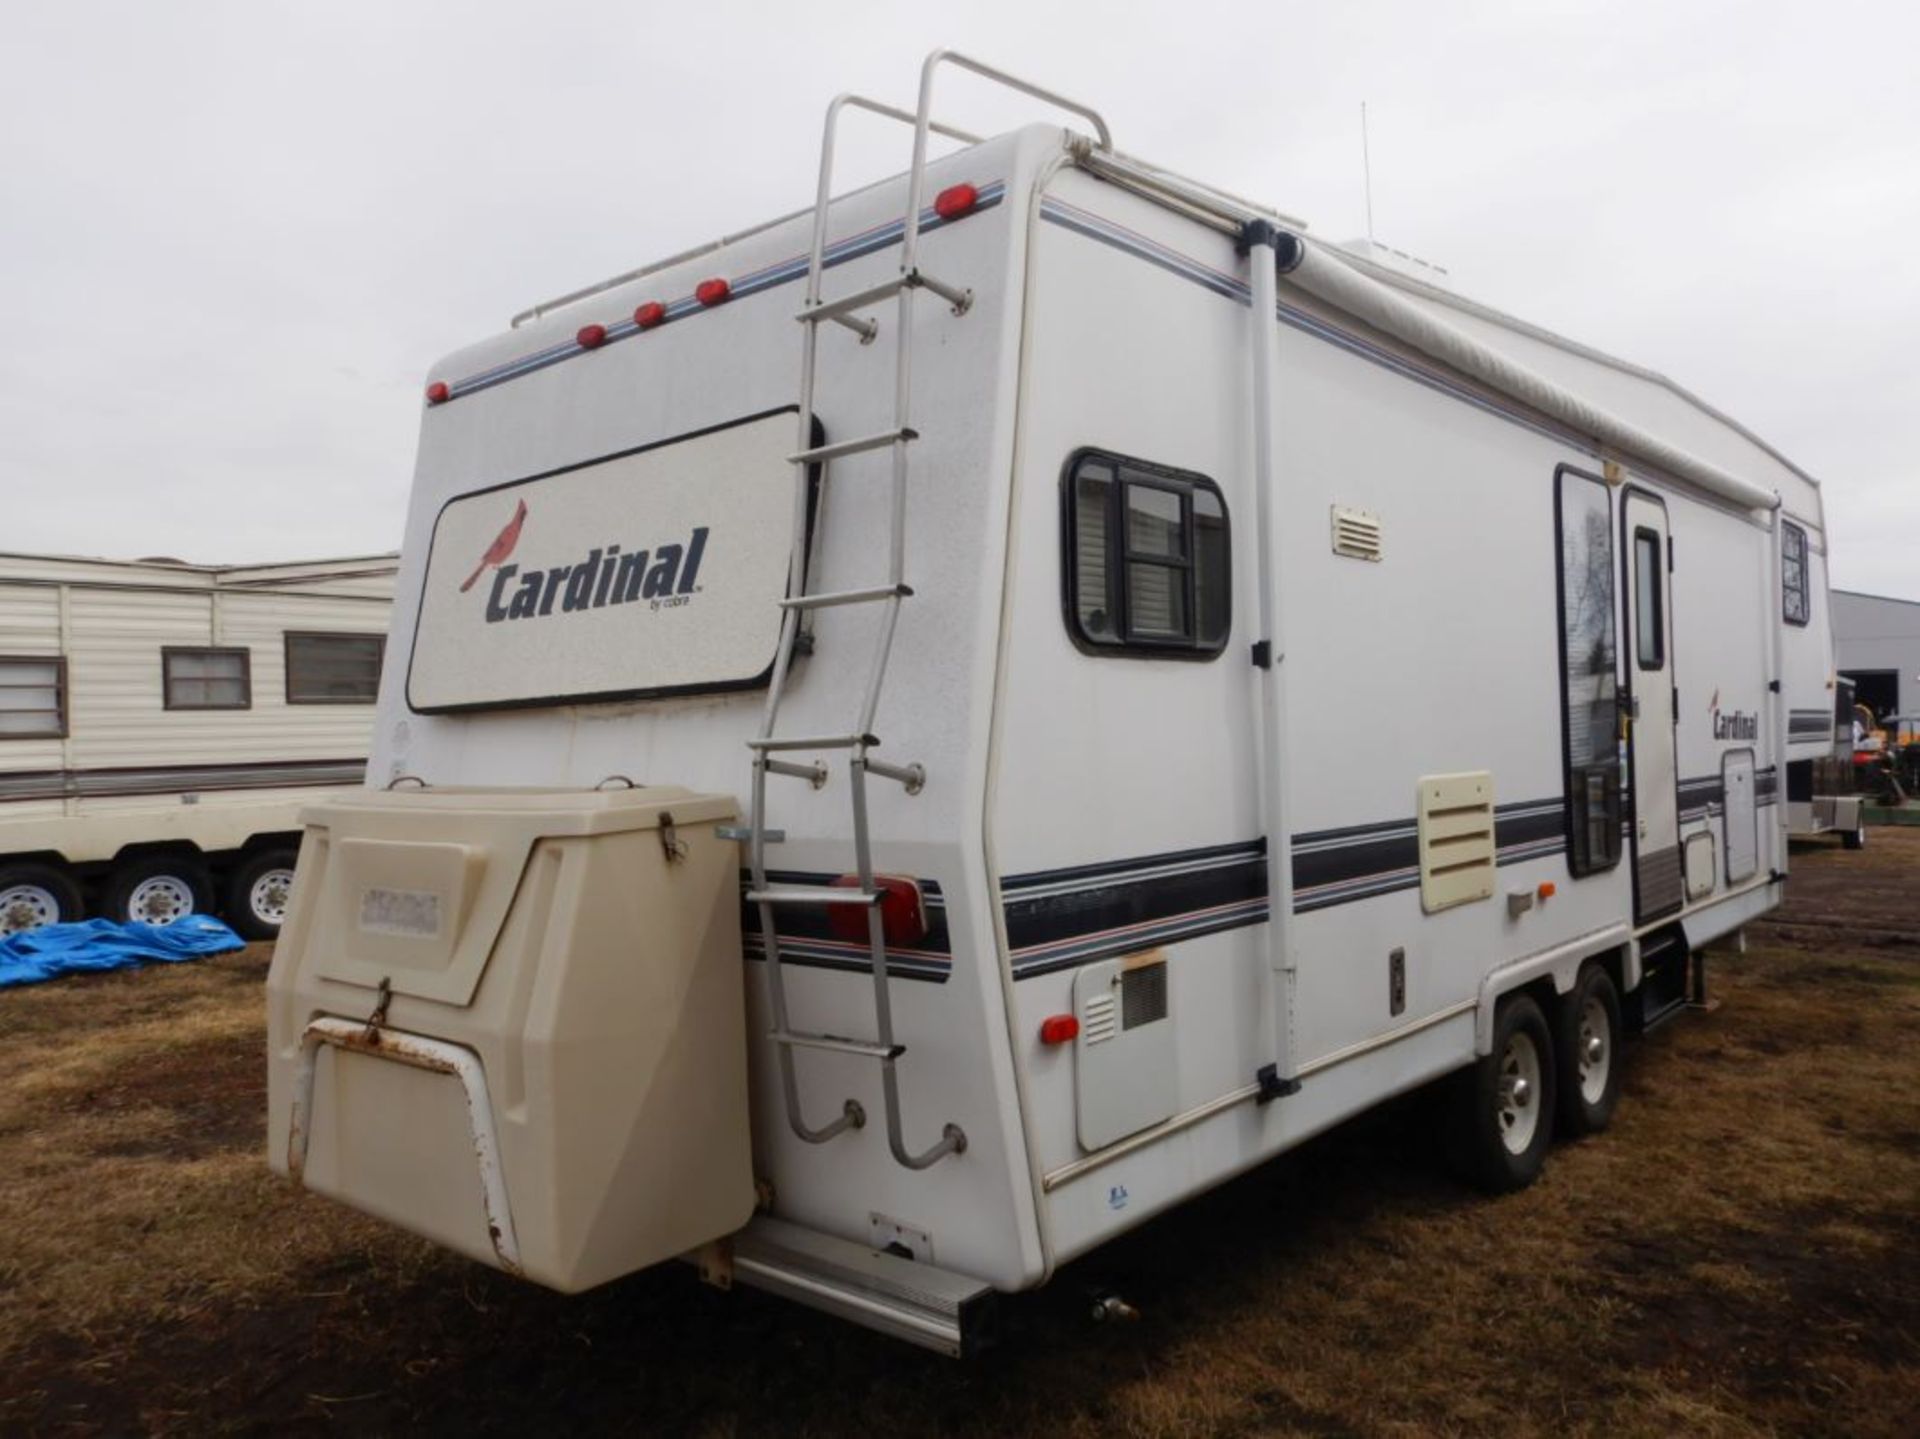 1995 CARDINAL BY COBRA 28' 5W HOLIDAY TRAILER WITH S/O. NEW AWNING, NEW TIRES, NEW STEPS, AC, SLEEPS - Image 5 of 15